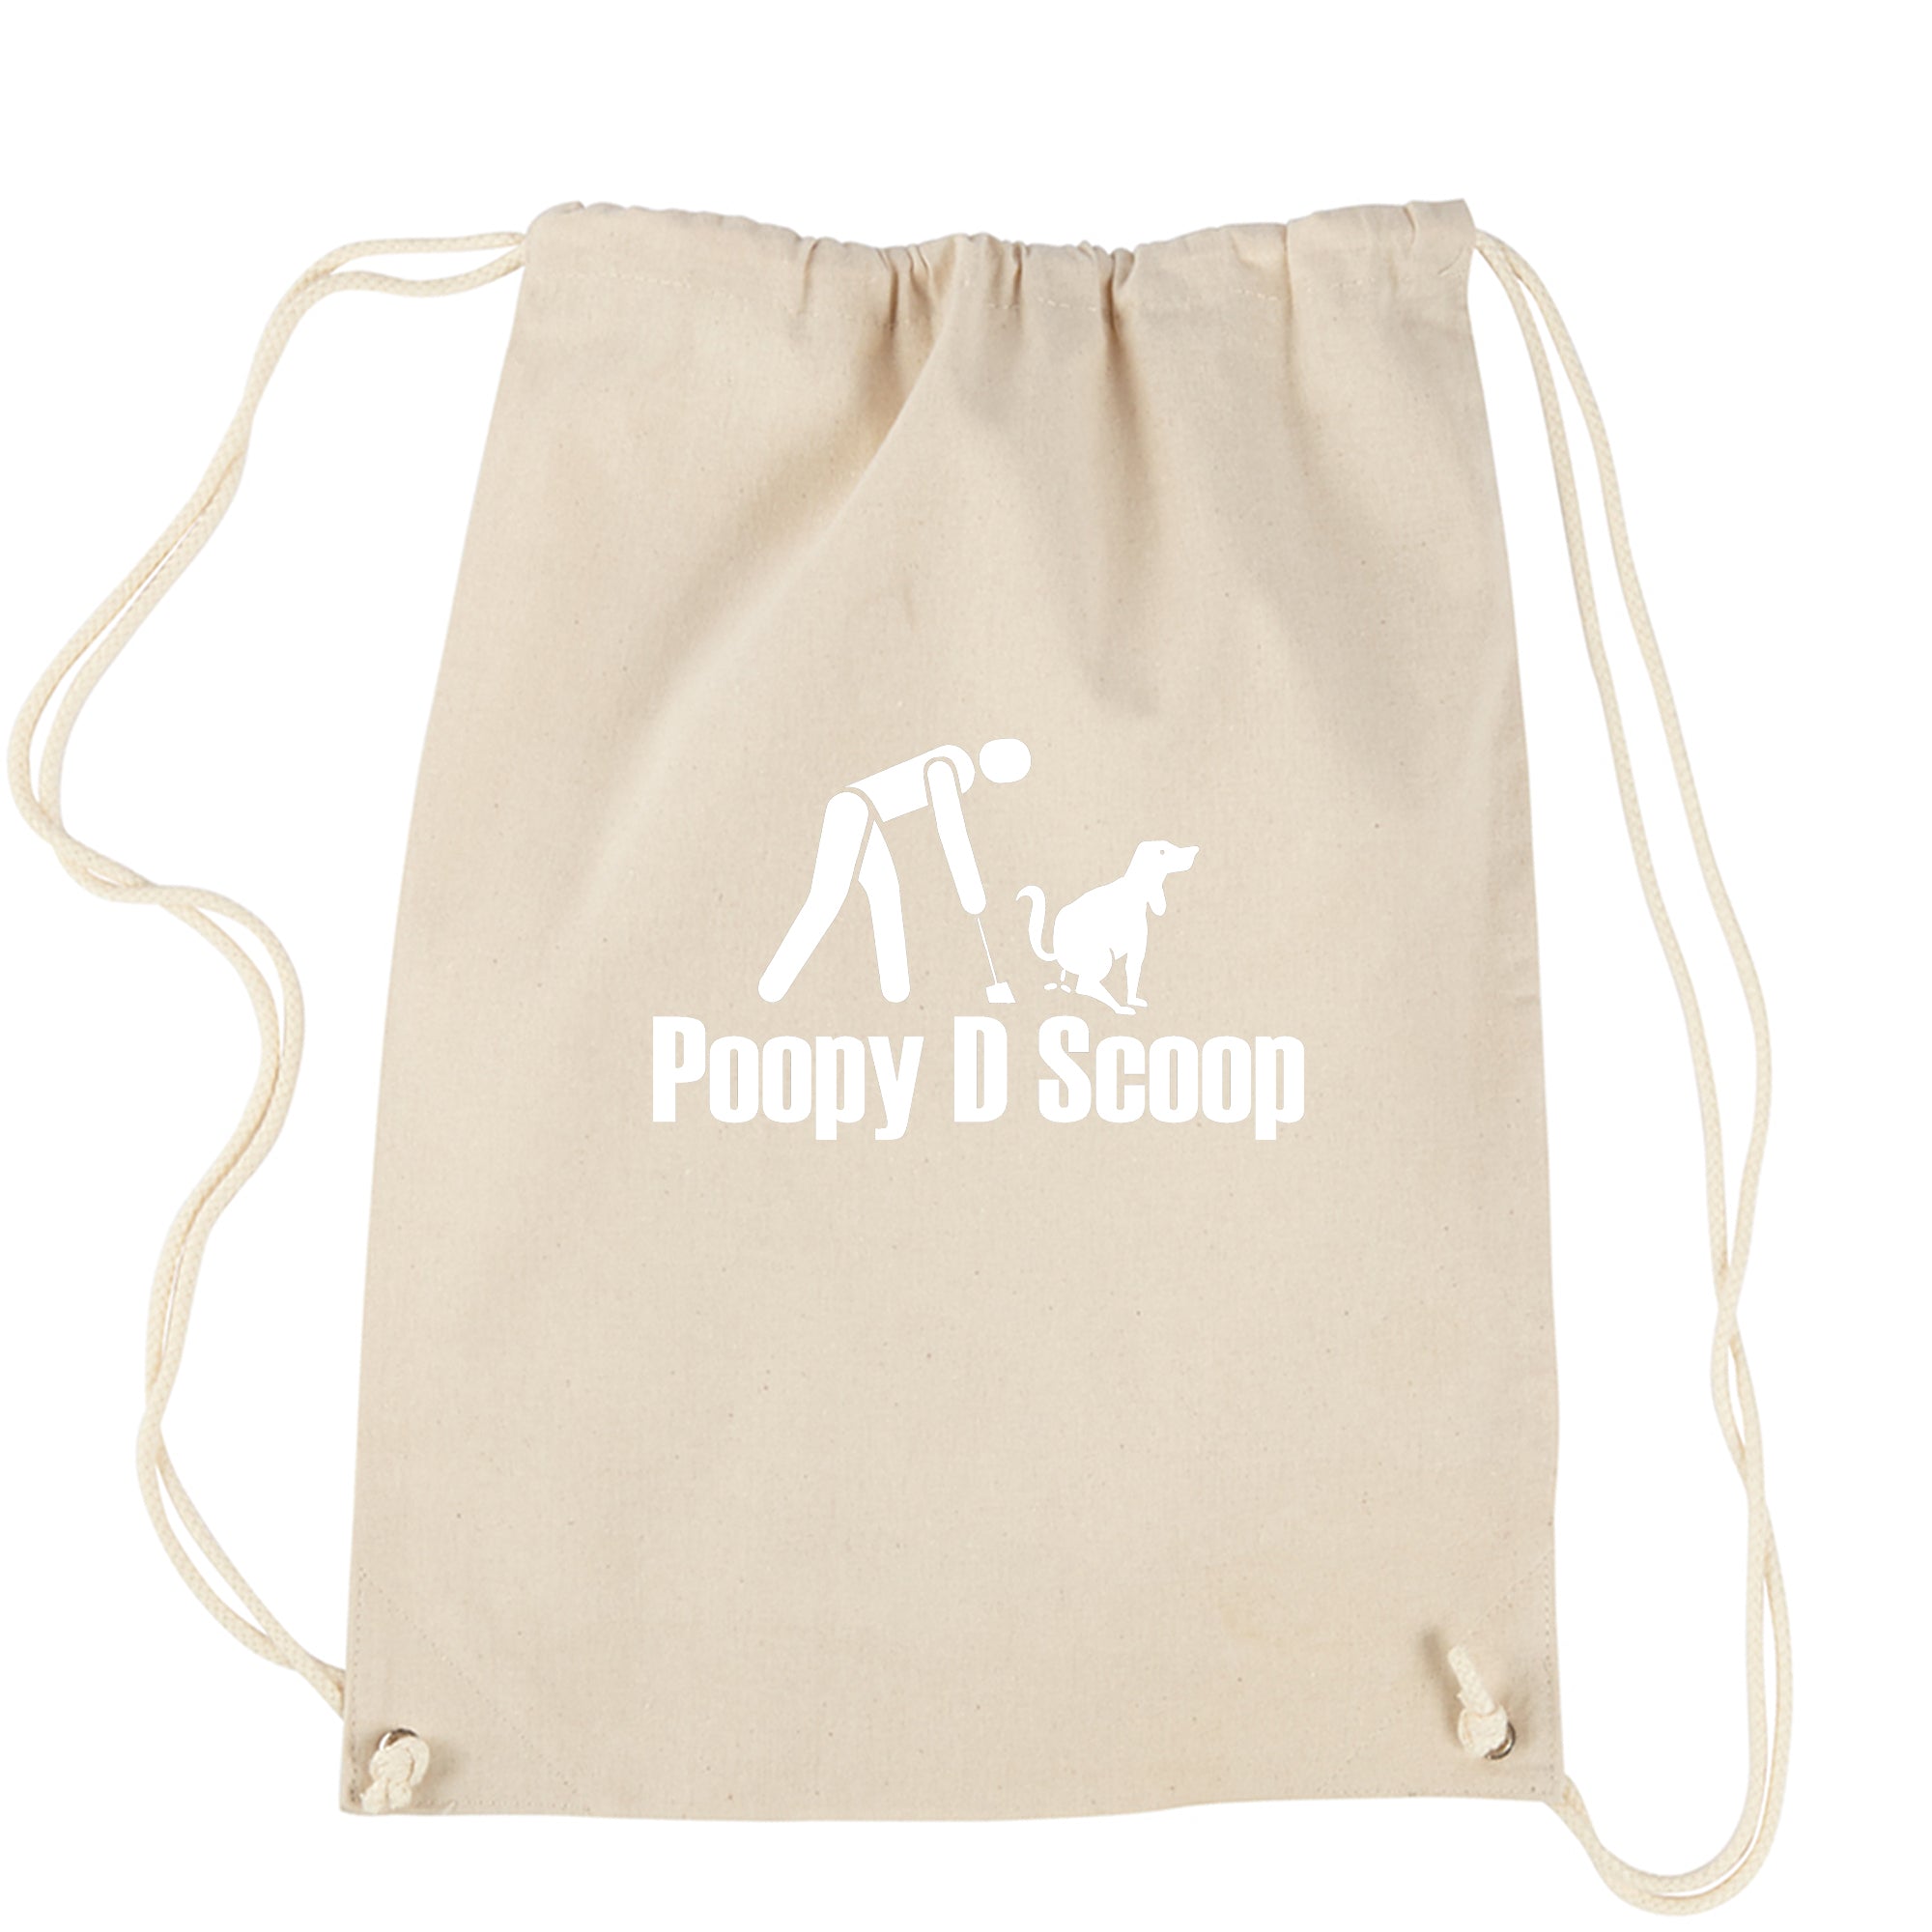 Lift Yourself Poopy Scoop Song Drawstring Backpack